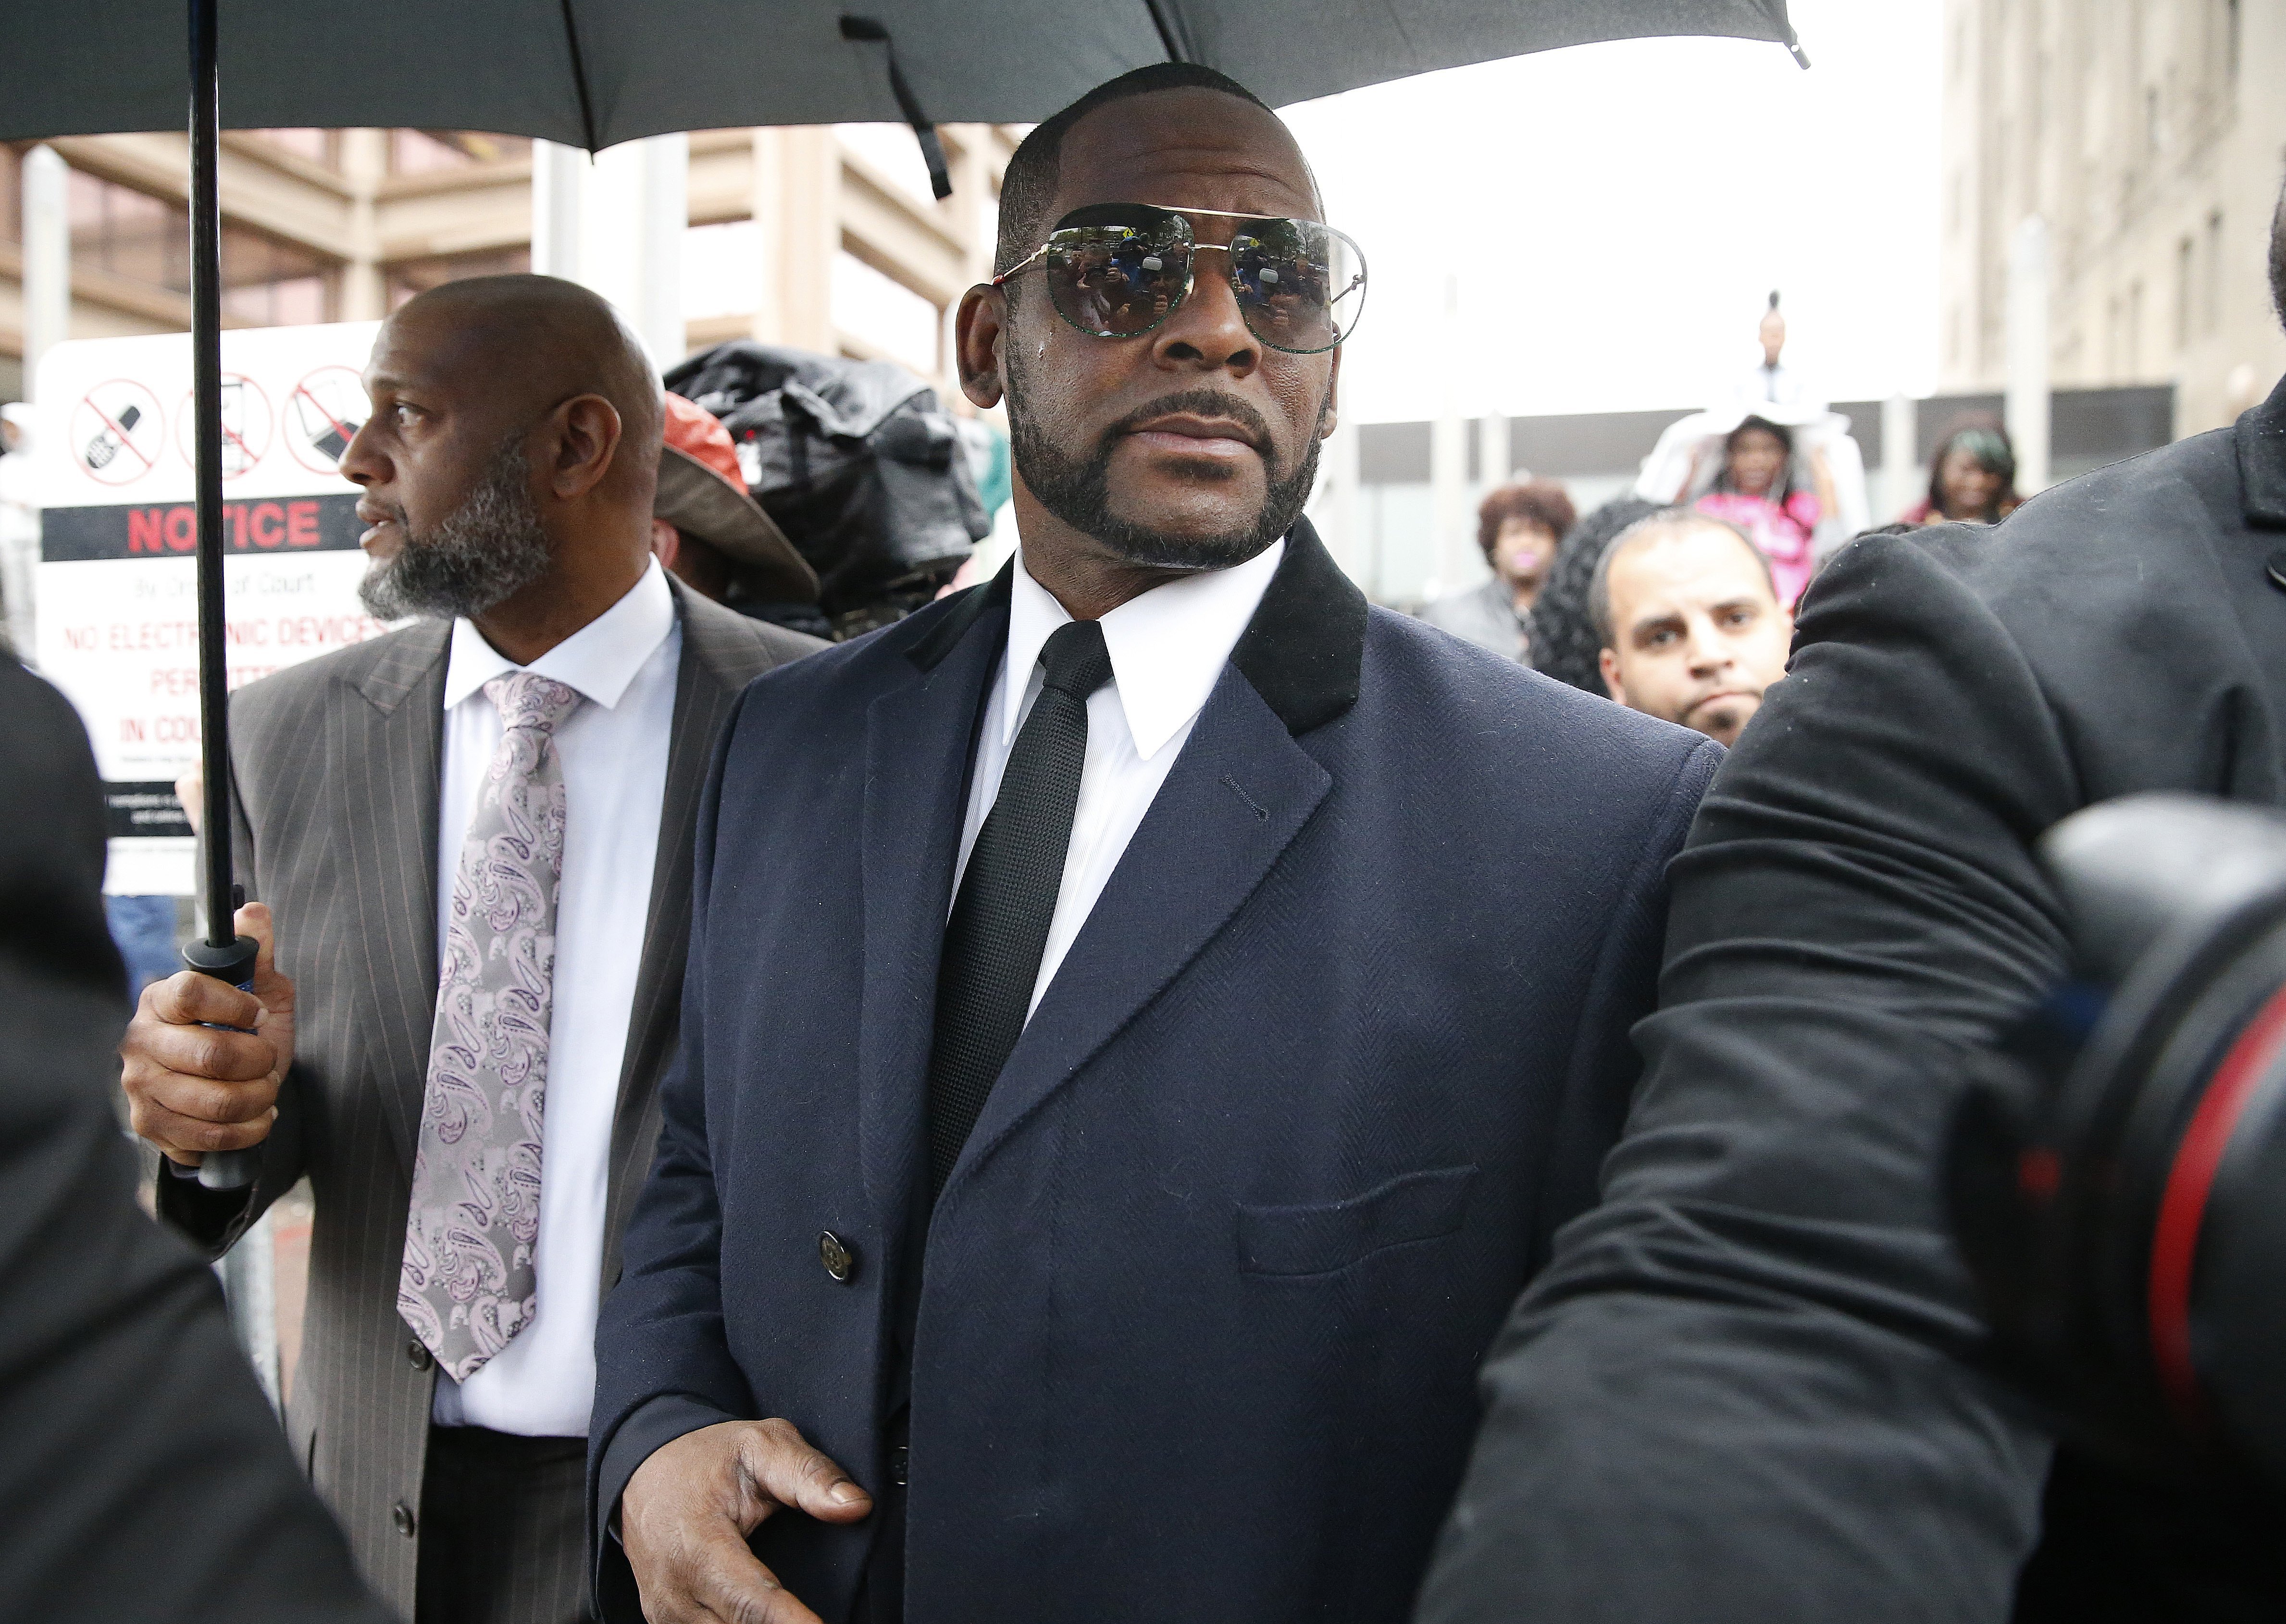 R. Kelly leaves the Leighton Courthouse on May 07, 2019 in Chicago | Photo: Getty Images